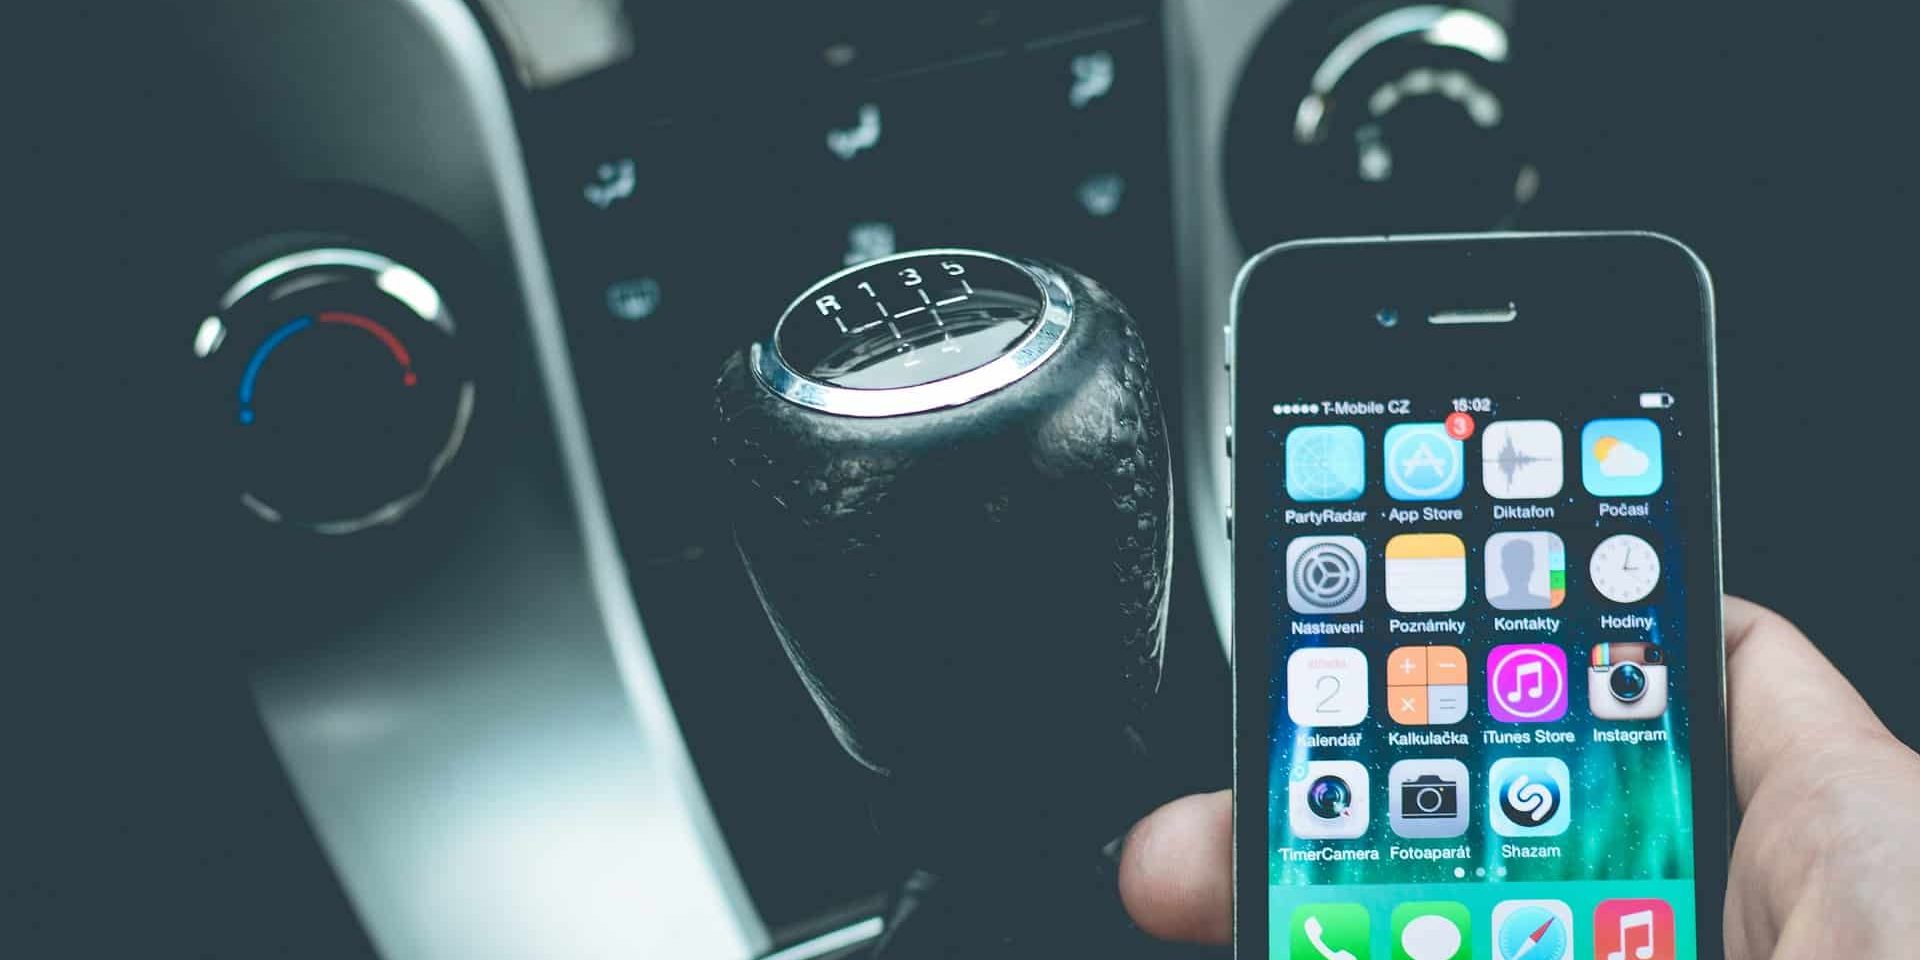 How to Turn Off Do Not Disturb While Driving